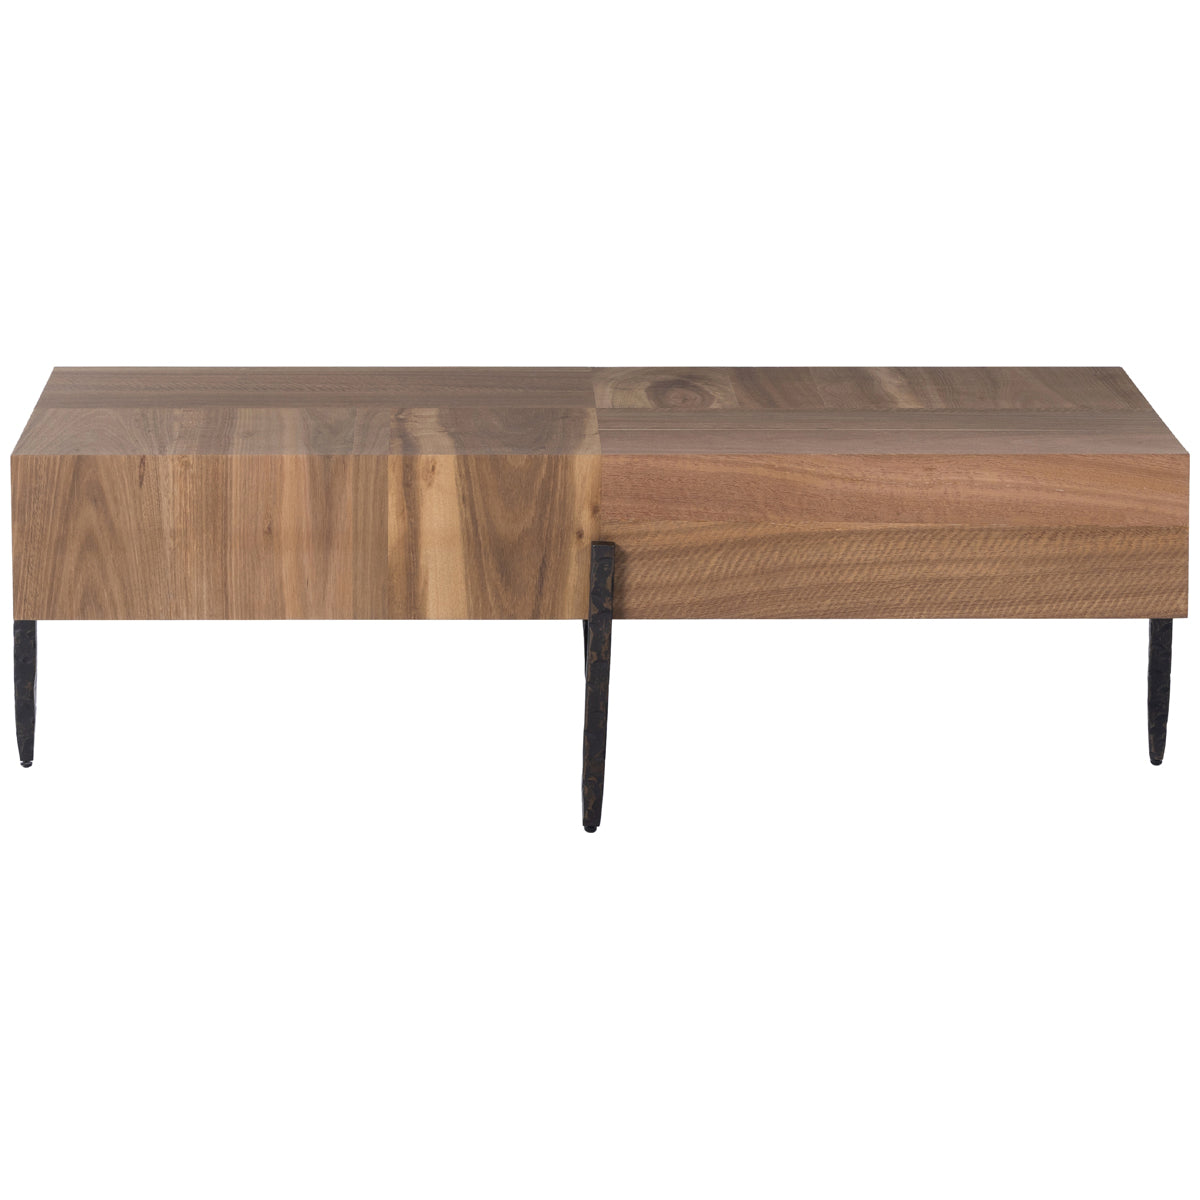 Four Hands Wesson Indra Coffee Table - Natural Yukas